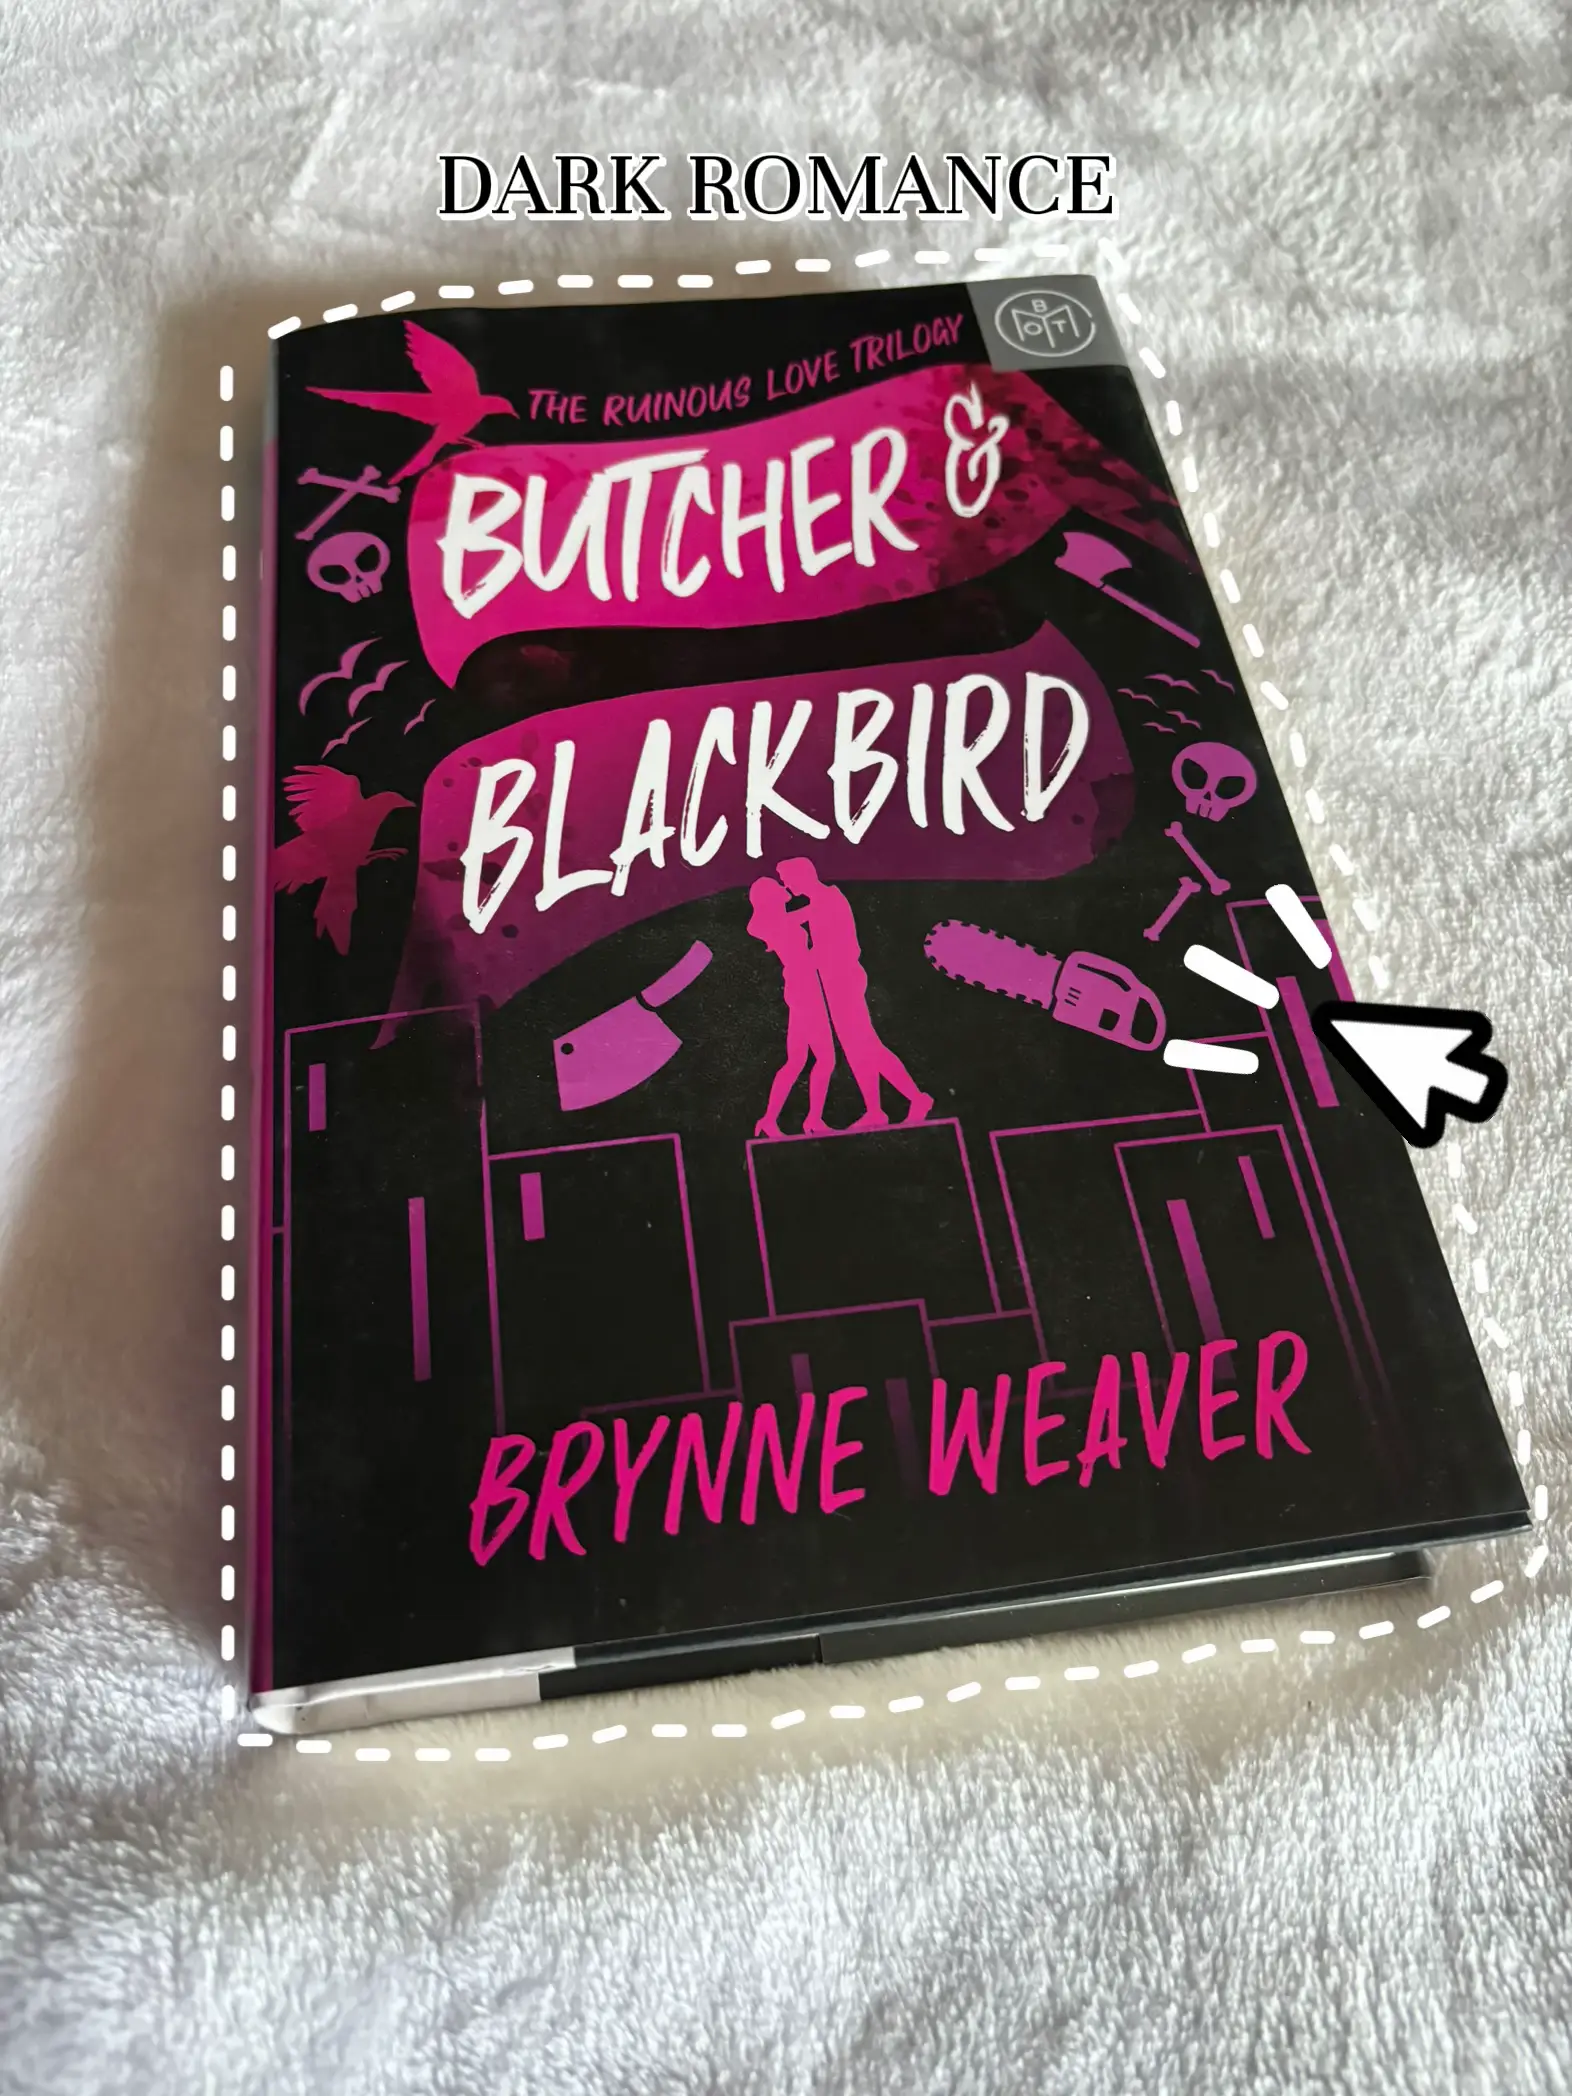 Butcher and Blackbird aesthetic 🖤🔪, Gallery posted by leeah